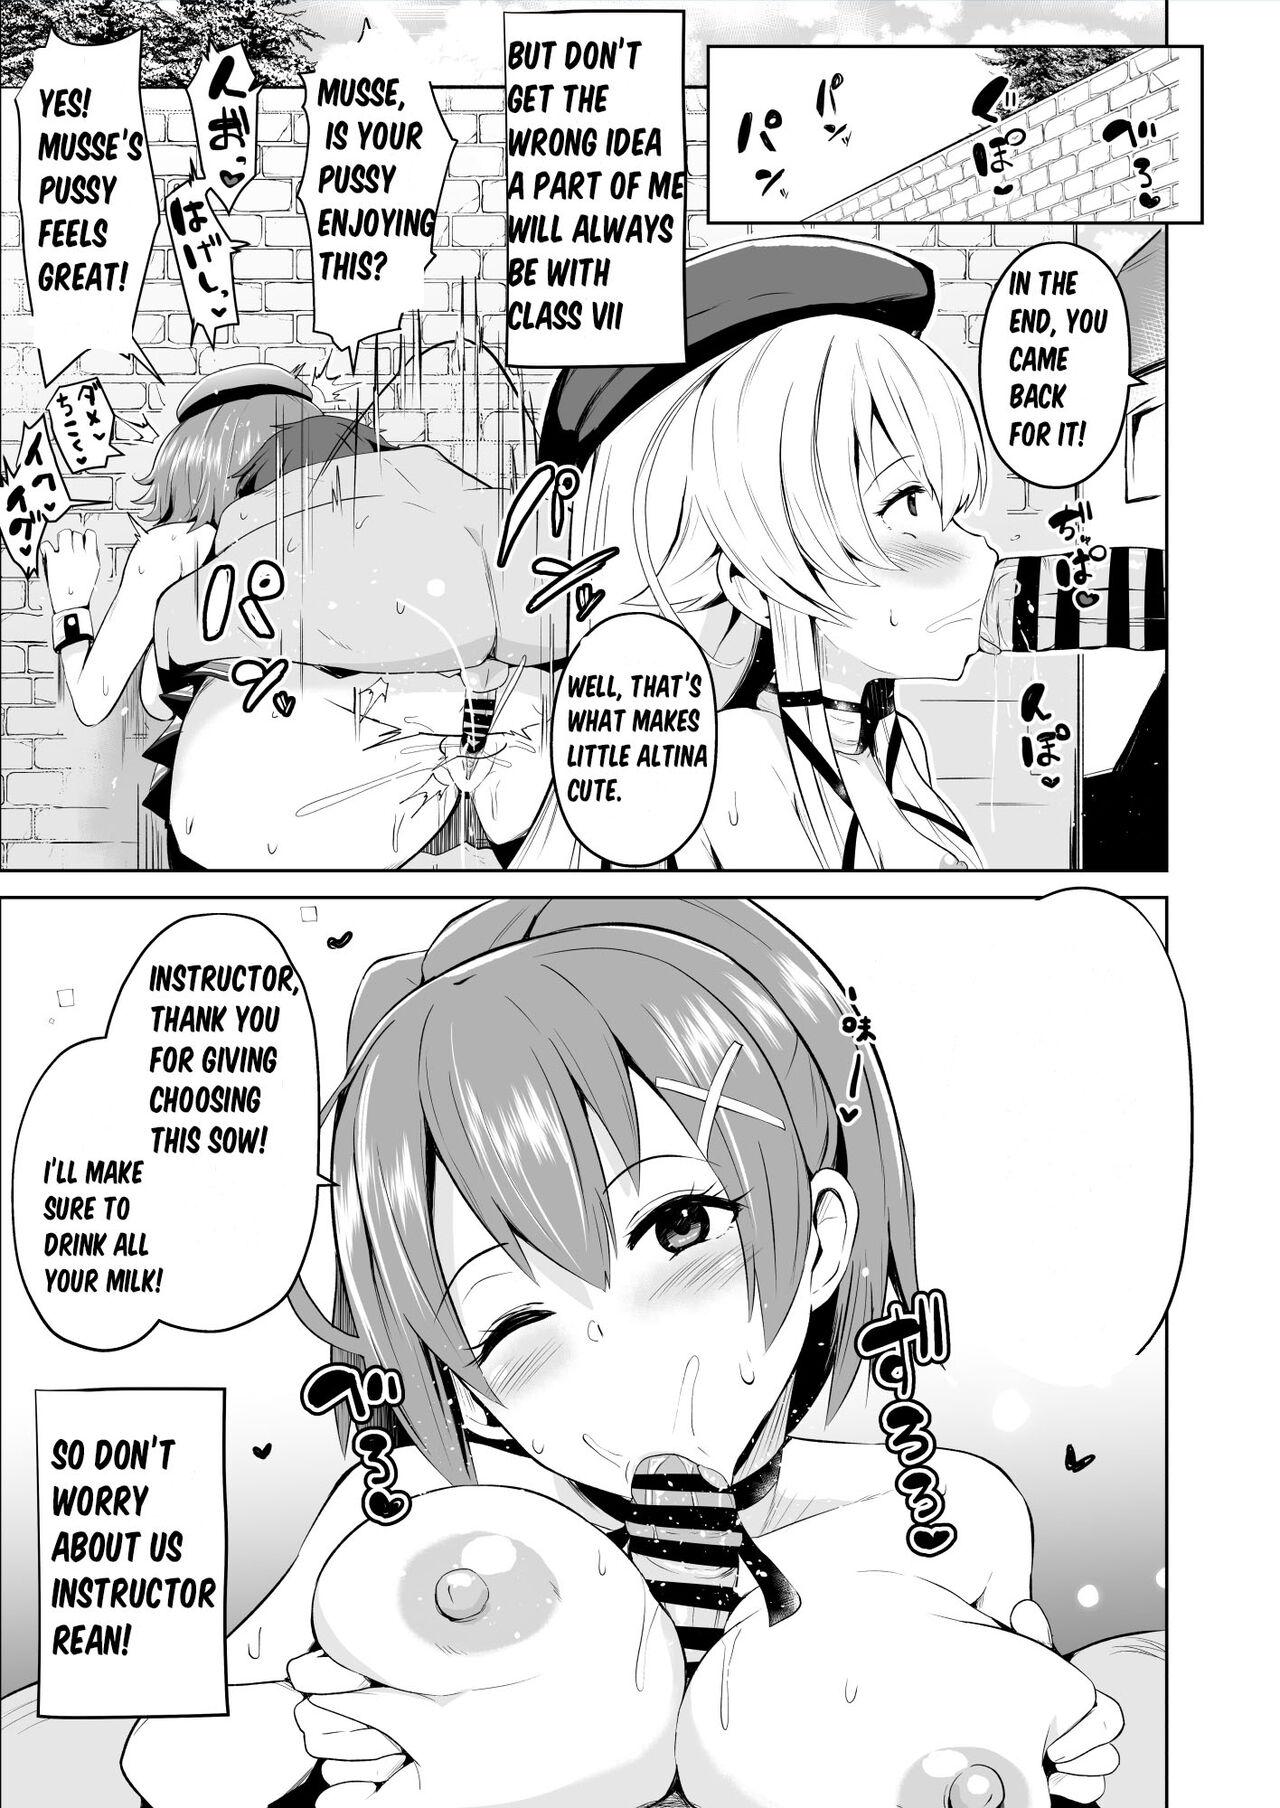 Sofa Hypnosis of the New Class VII - The legend of heroes | eiyuu densetsu Butthole - Page 8